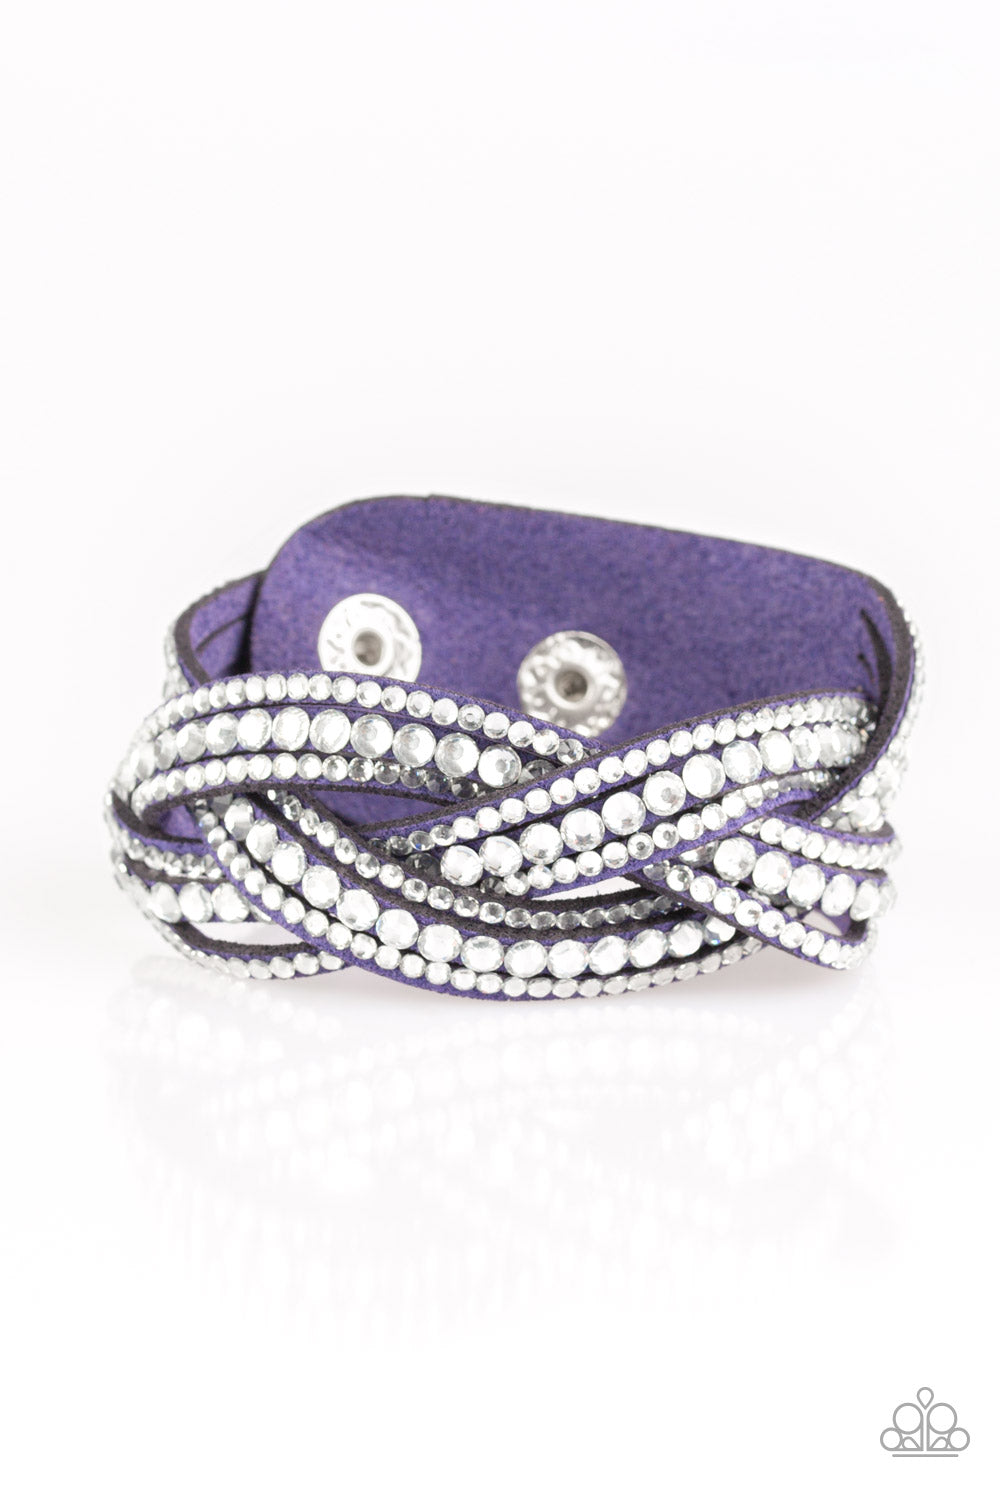 Bring on the Bling Paparazzi Accessories Bracelet